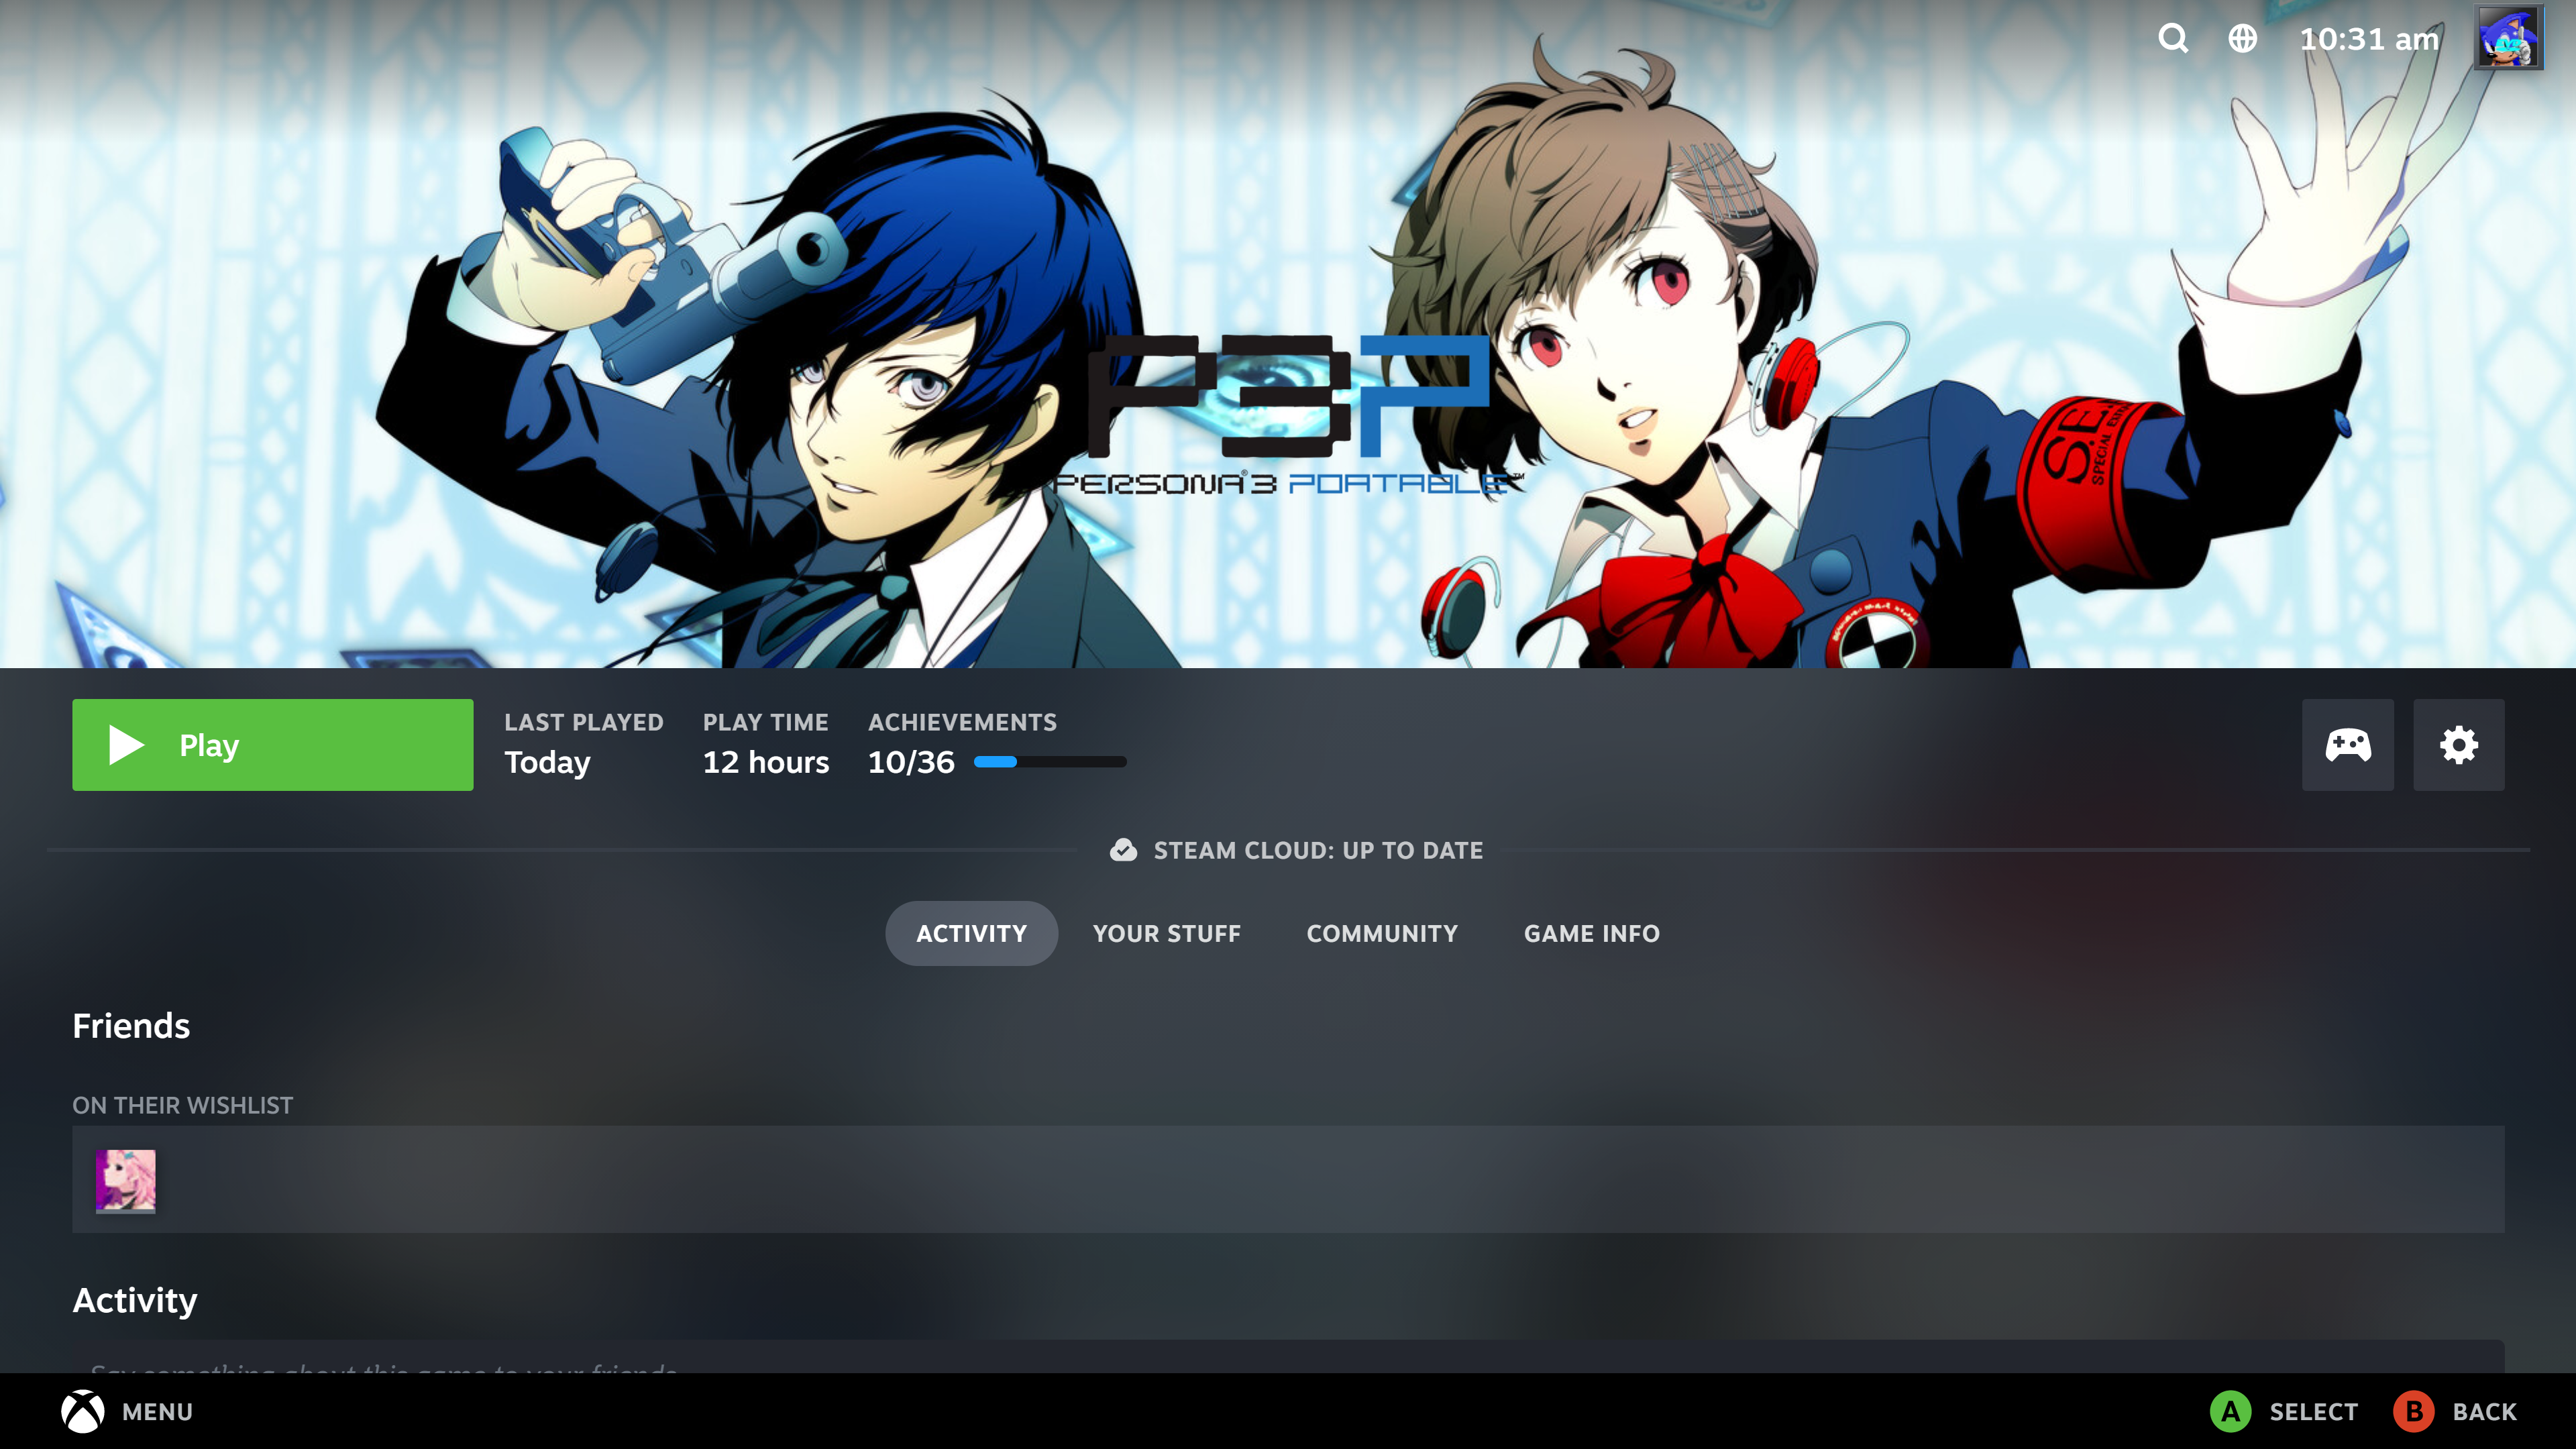 The main screen for Persona 3 Portable within Steam's new Big Picture UI.